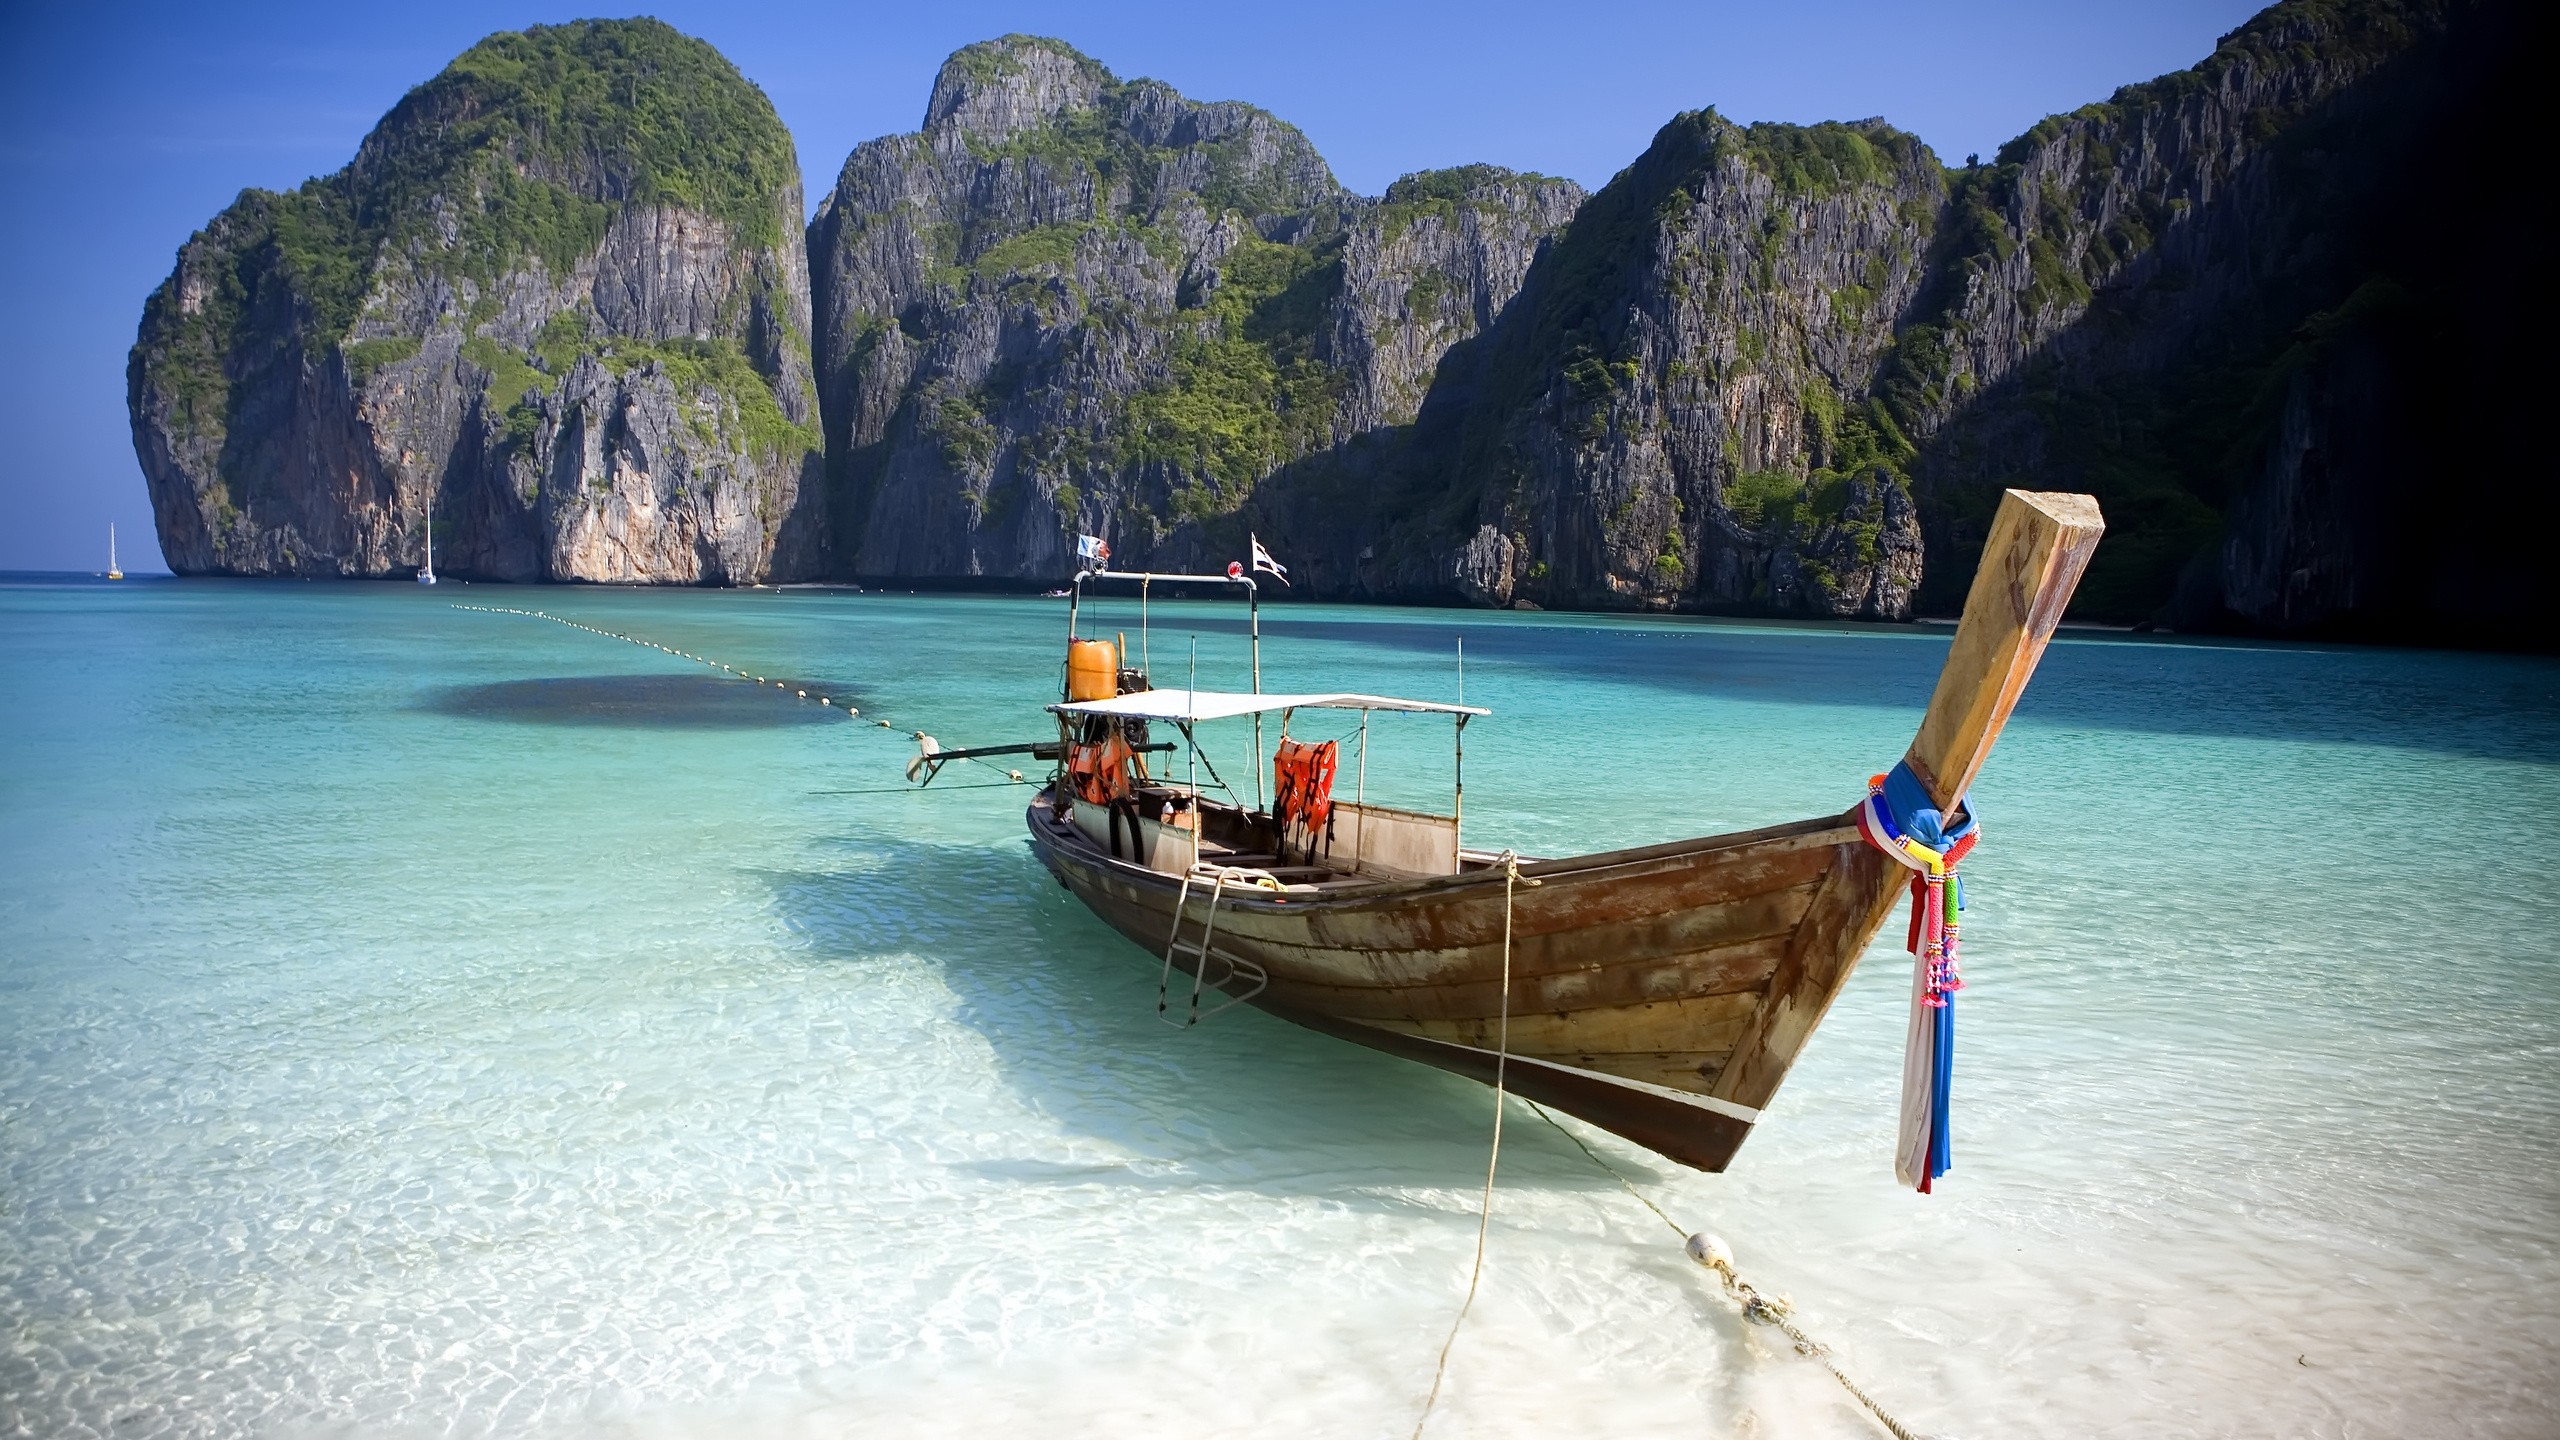 General 2560x1440 beach boat cliff Phi Phi Islands Asia vehicle